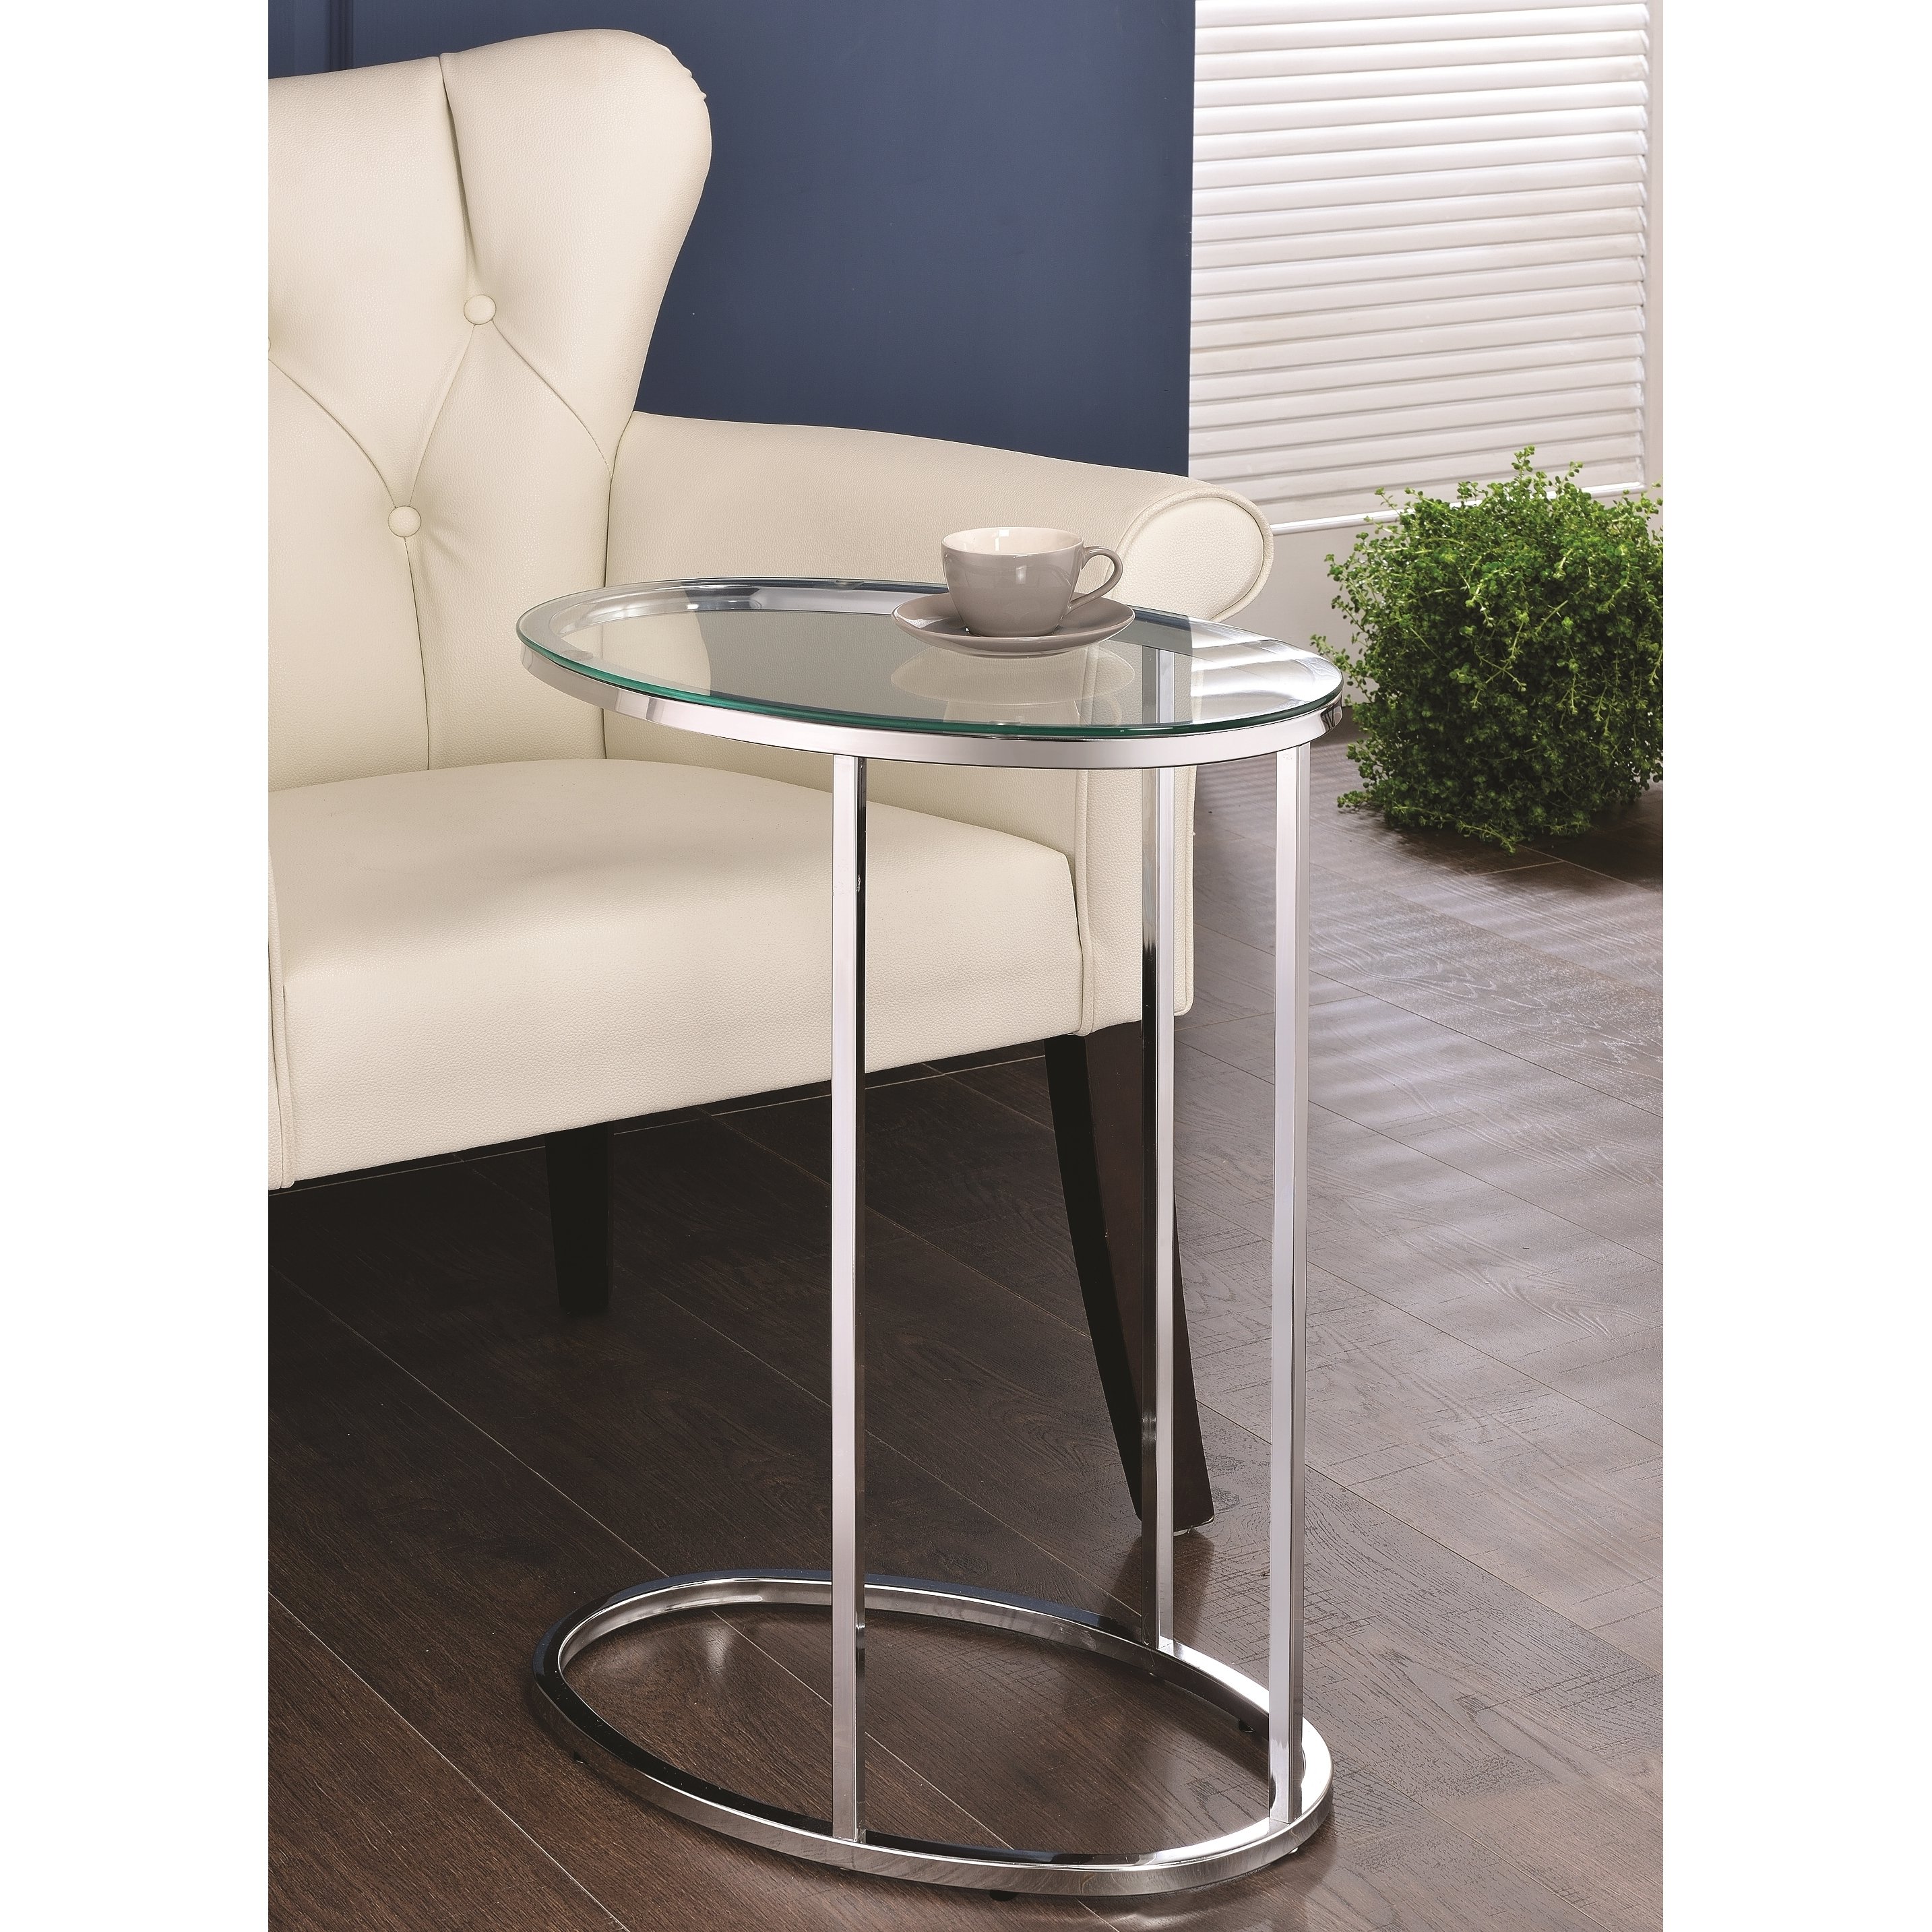 modern design living room oval shaped chrome accent snack table with tempered glass top free shipping today used furniture wicker patio set mid century dresser balcony drum box